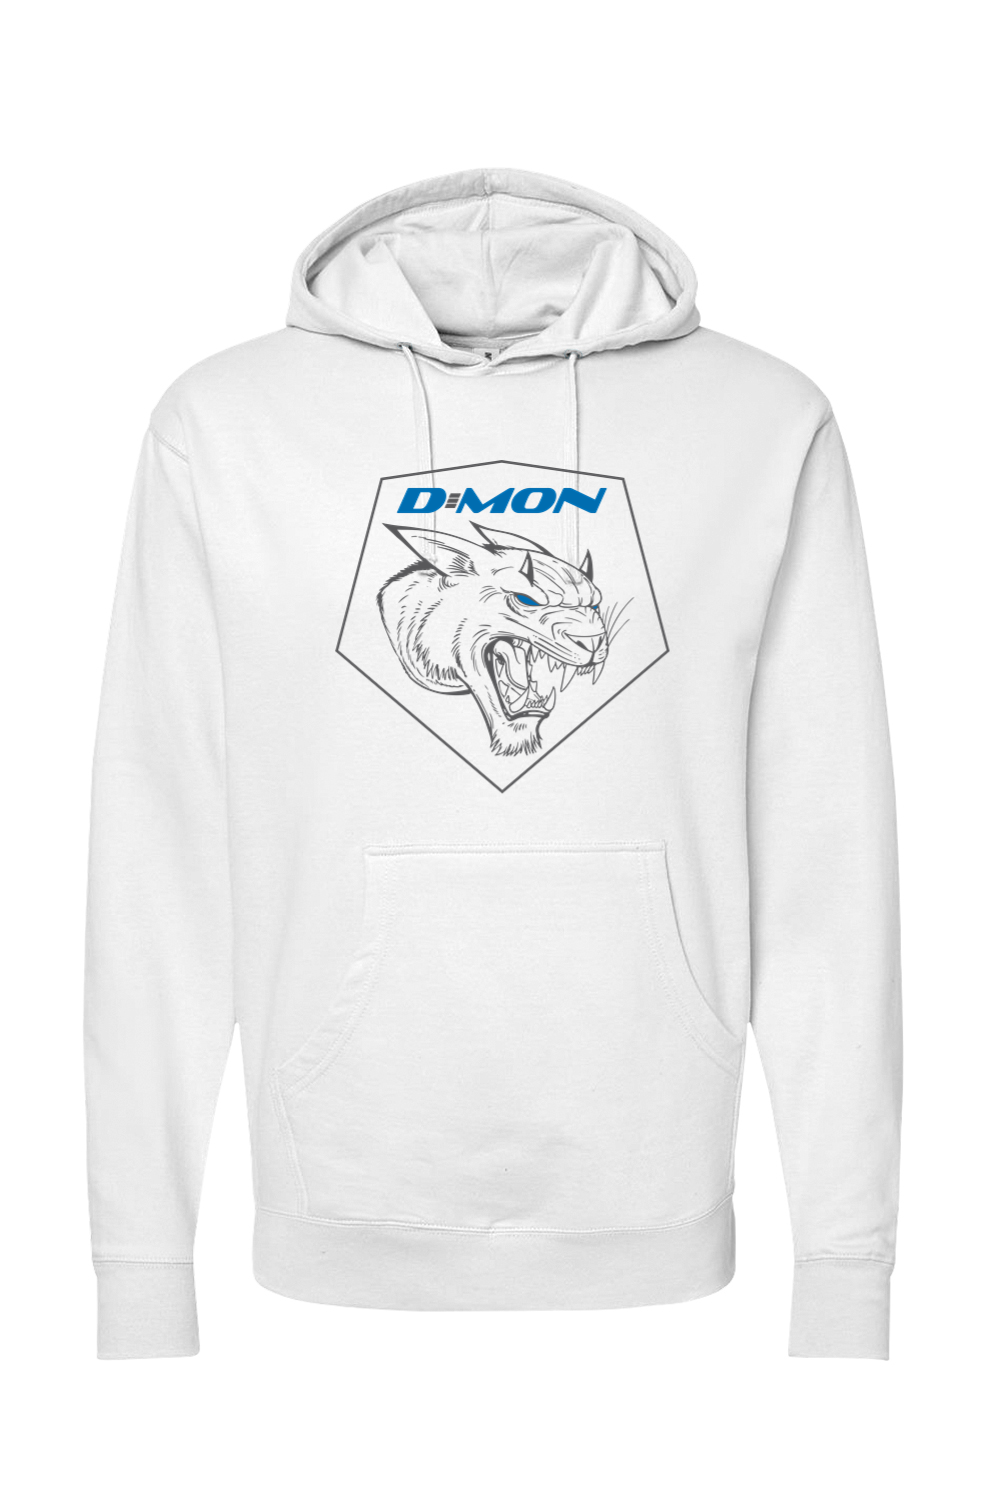 D-Mon 2023 - Lions Midweight Hoodie